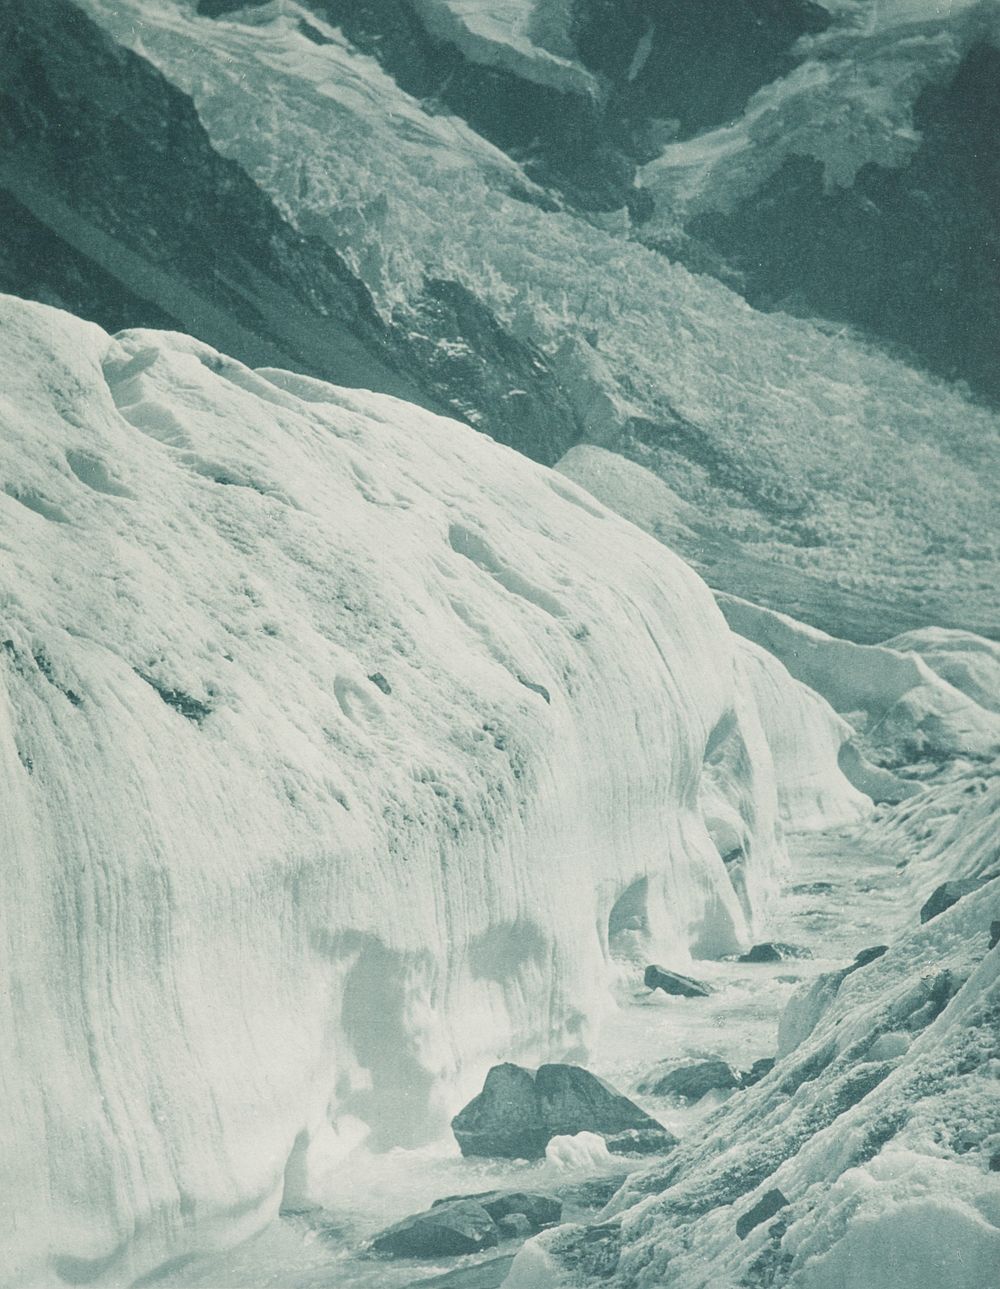 The Hockstetter Glacier and ice fall, Mt Cook district. From the album: Record Pictures of New Zealand (1920s) by Harry…